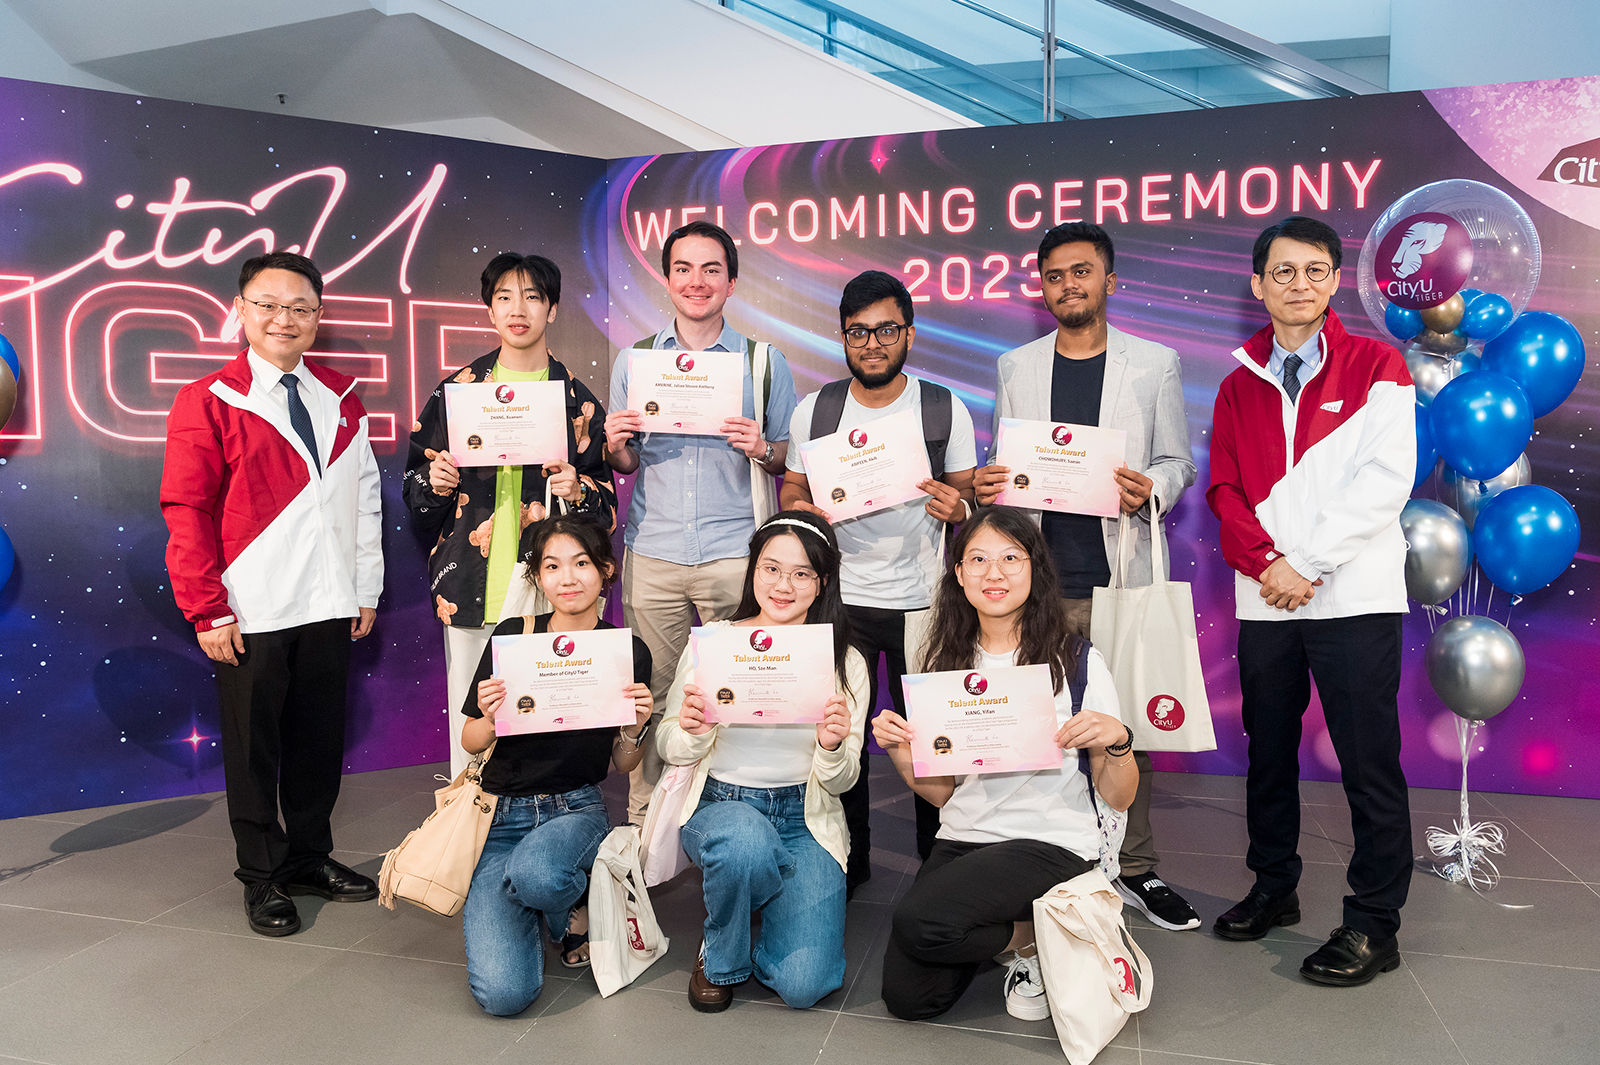 CityU Tiger students embark on their transformation into future leaders.